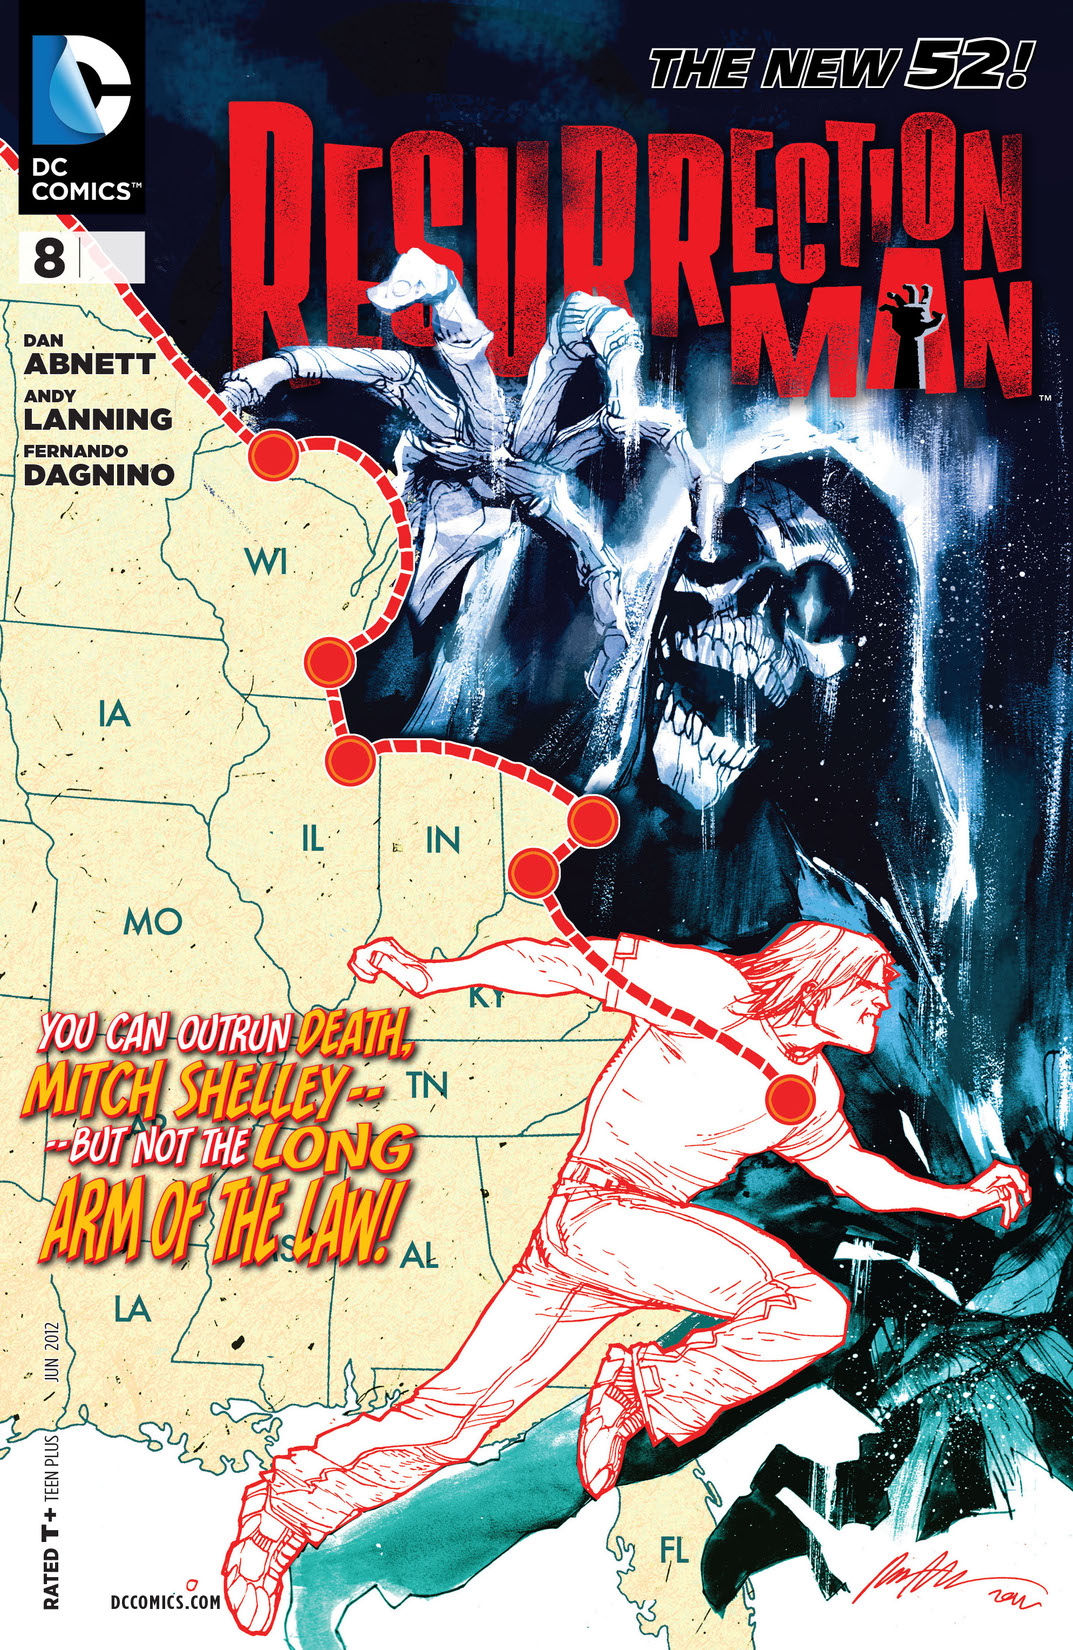 Resurrection Man (2011-) #8 preview images